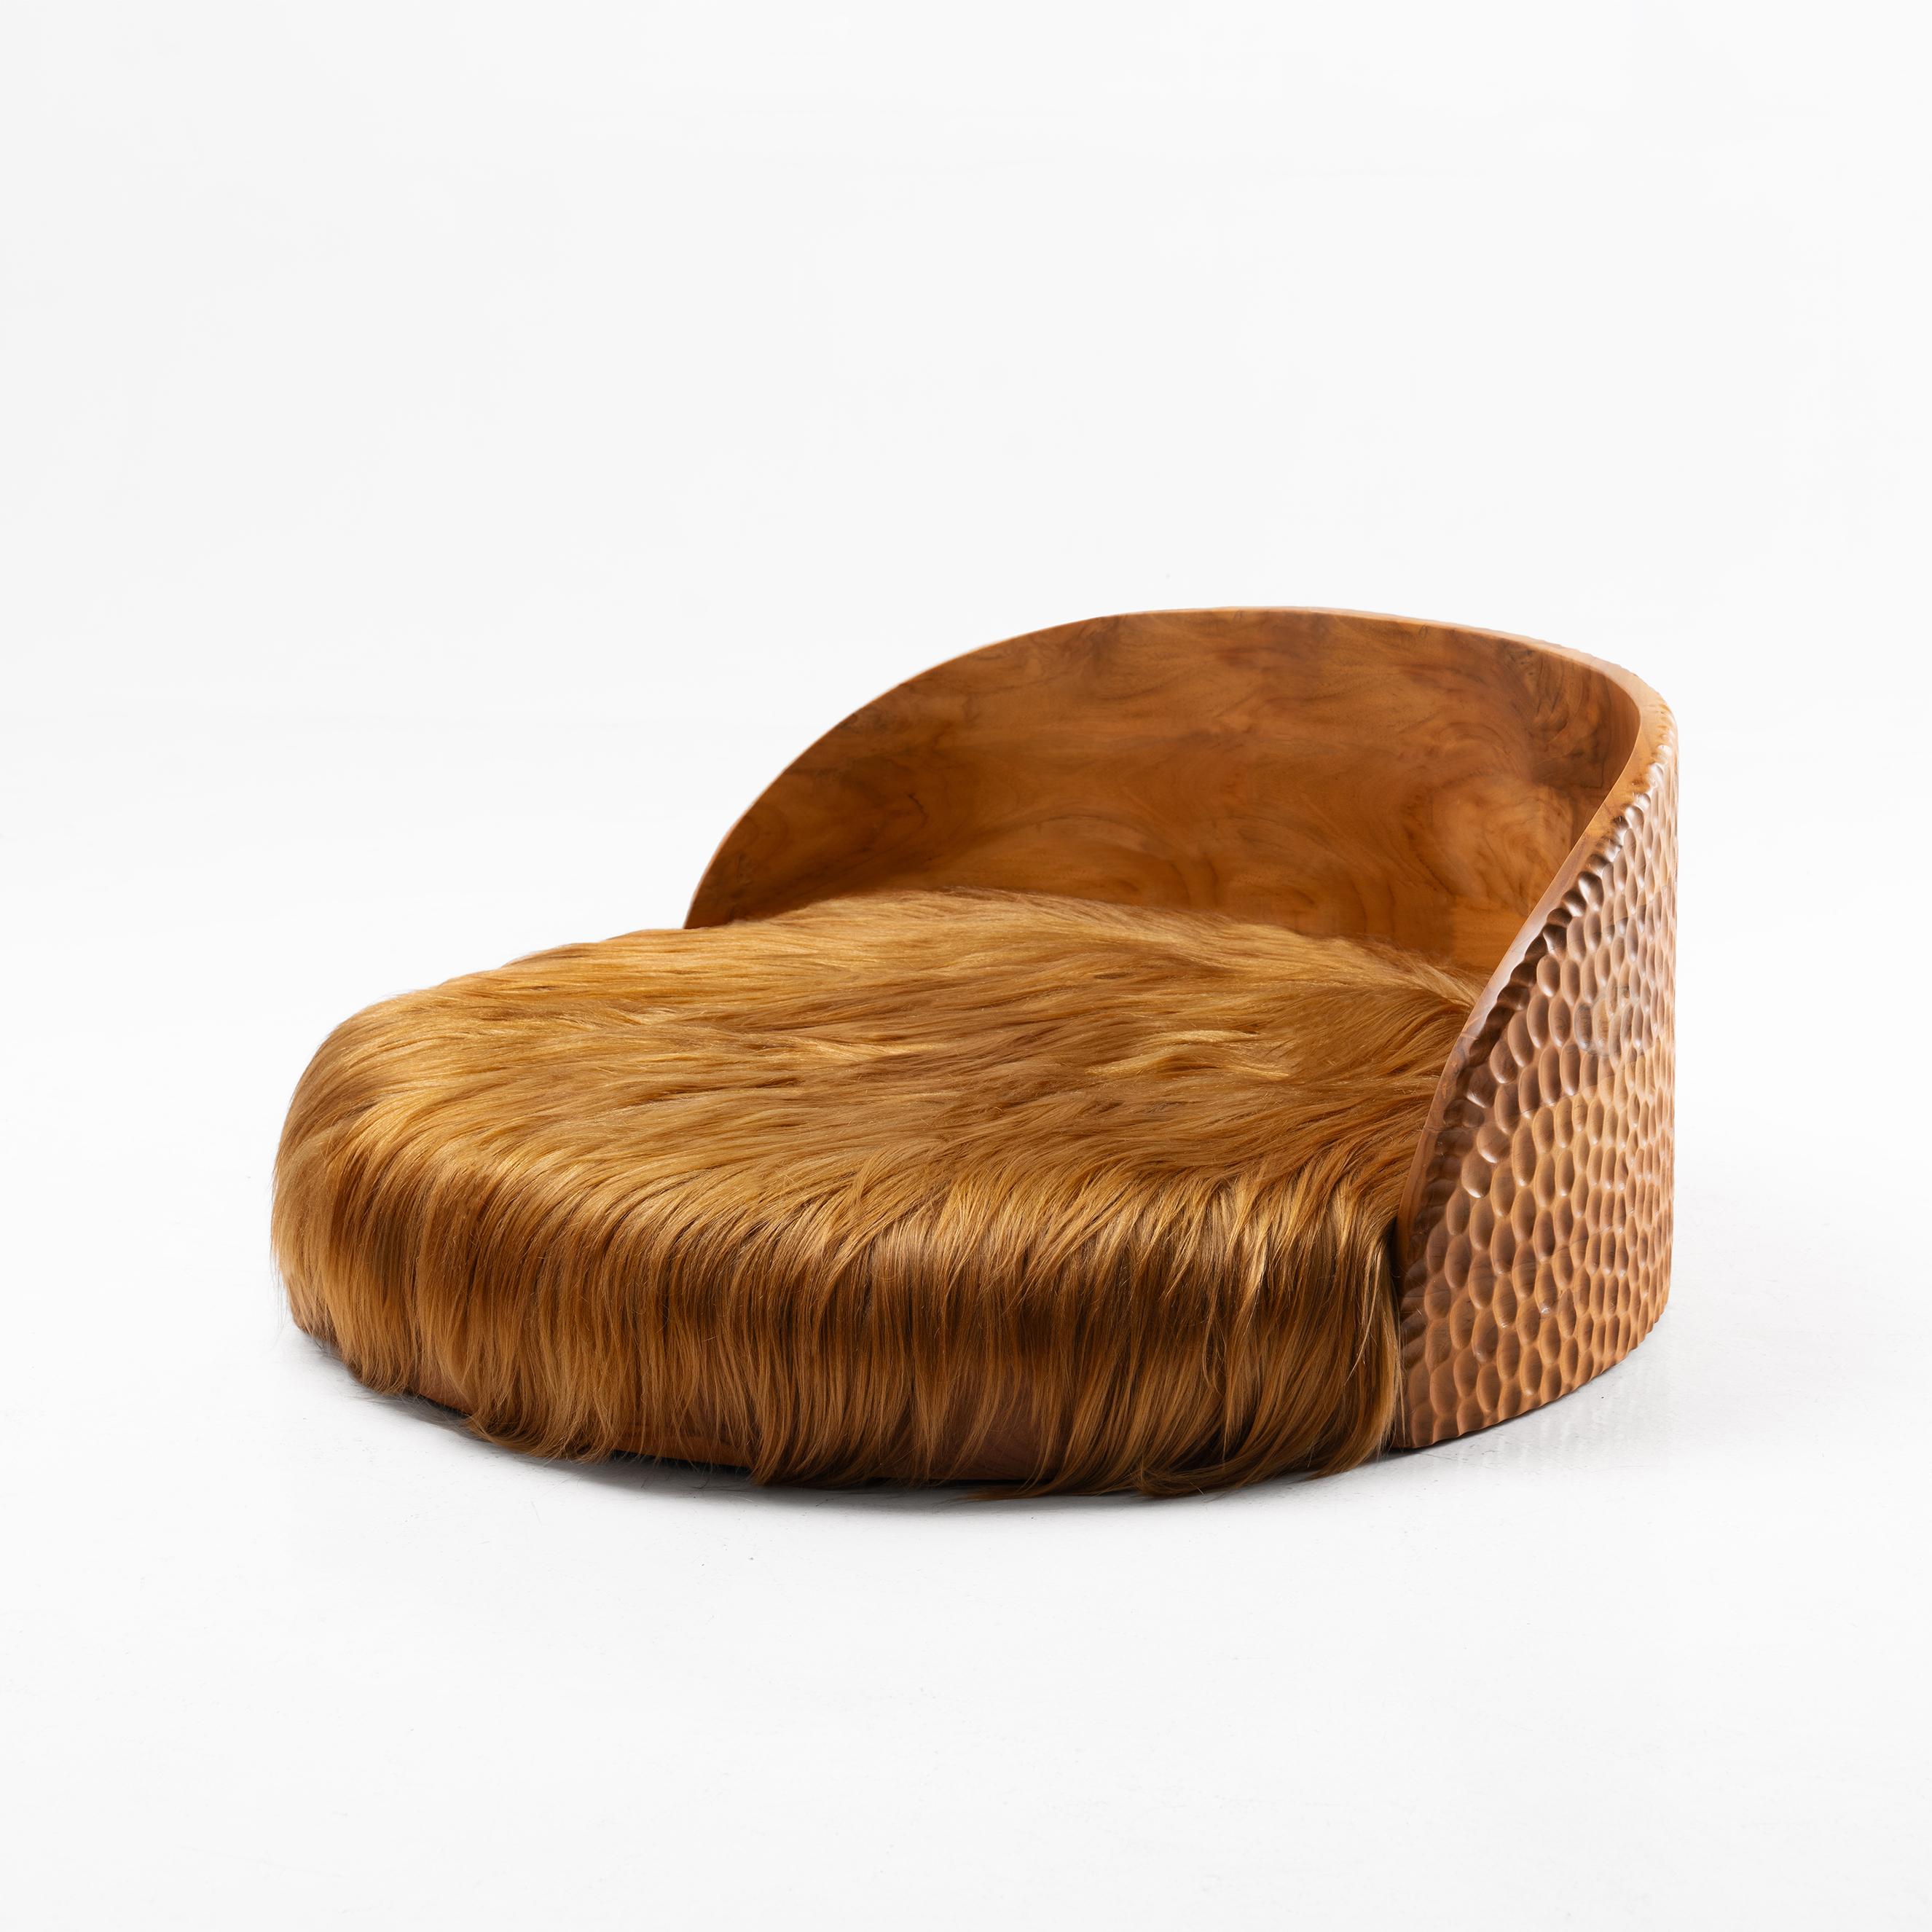 The Boo Bed is a contemporary architectural throne for your doggo. Upholstered in luxurious long haired sheepskin for your fur baby’s comfort. Featuring hand-carved details and made using sustainability sourced teak.

All natural hides used on